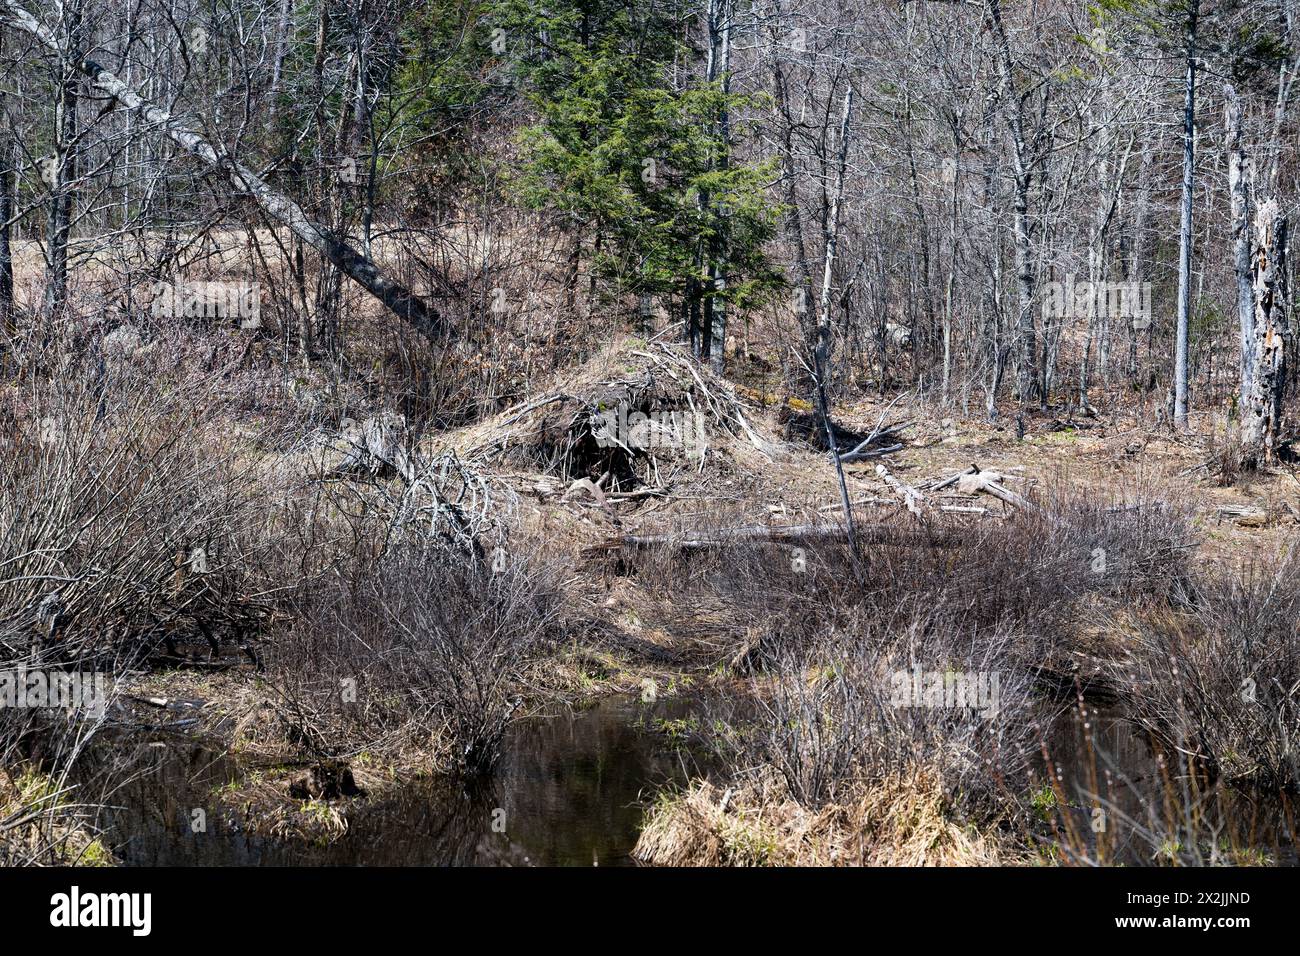 An abandoned old beaver house due to low water levels in the Adirondack Mountains, NY Stock Photo